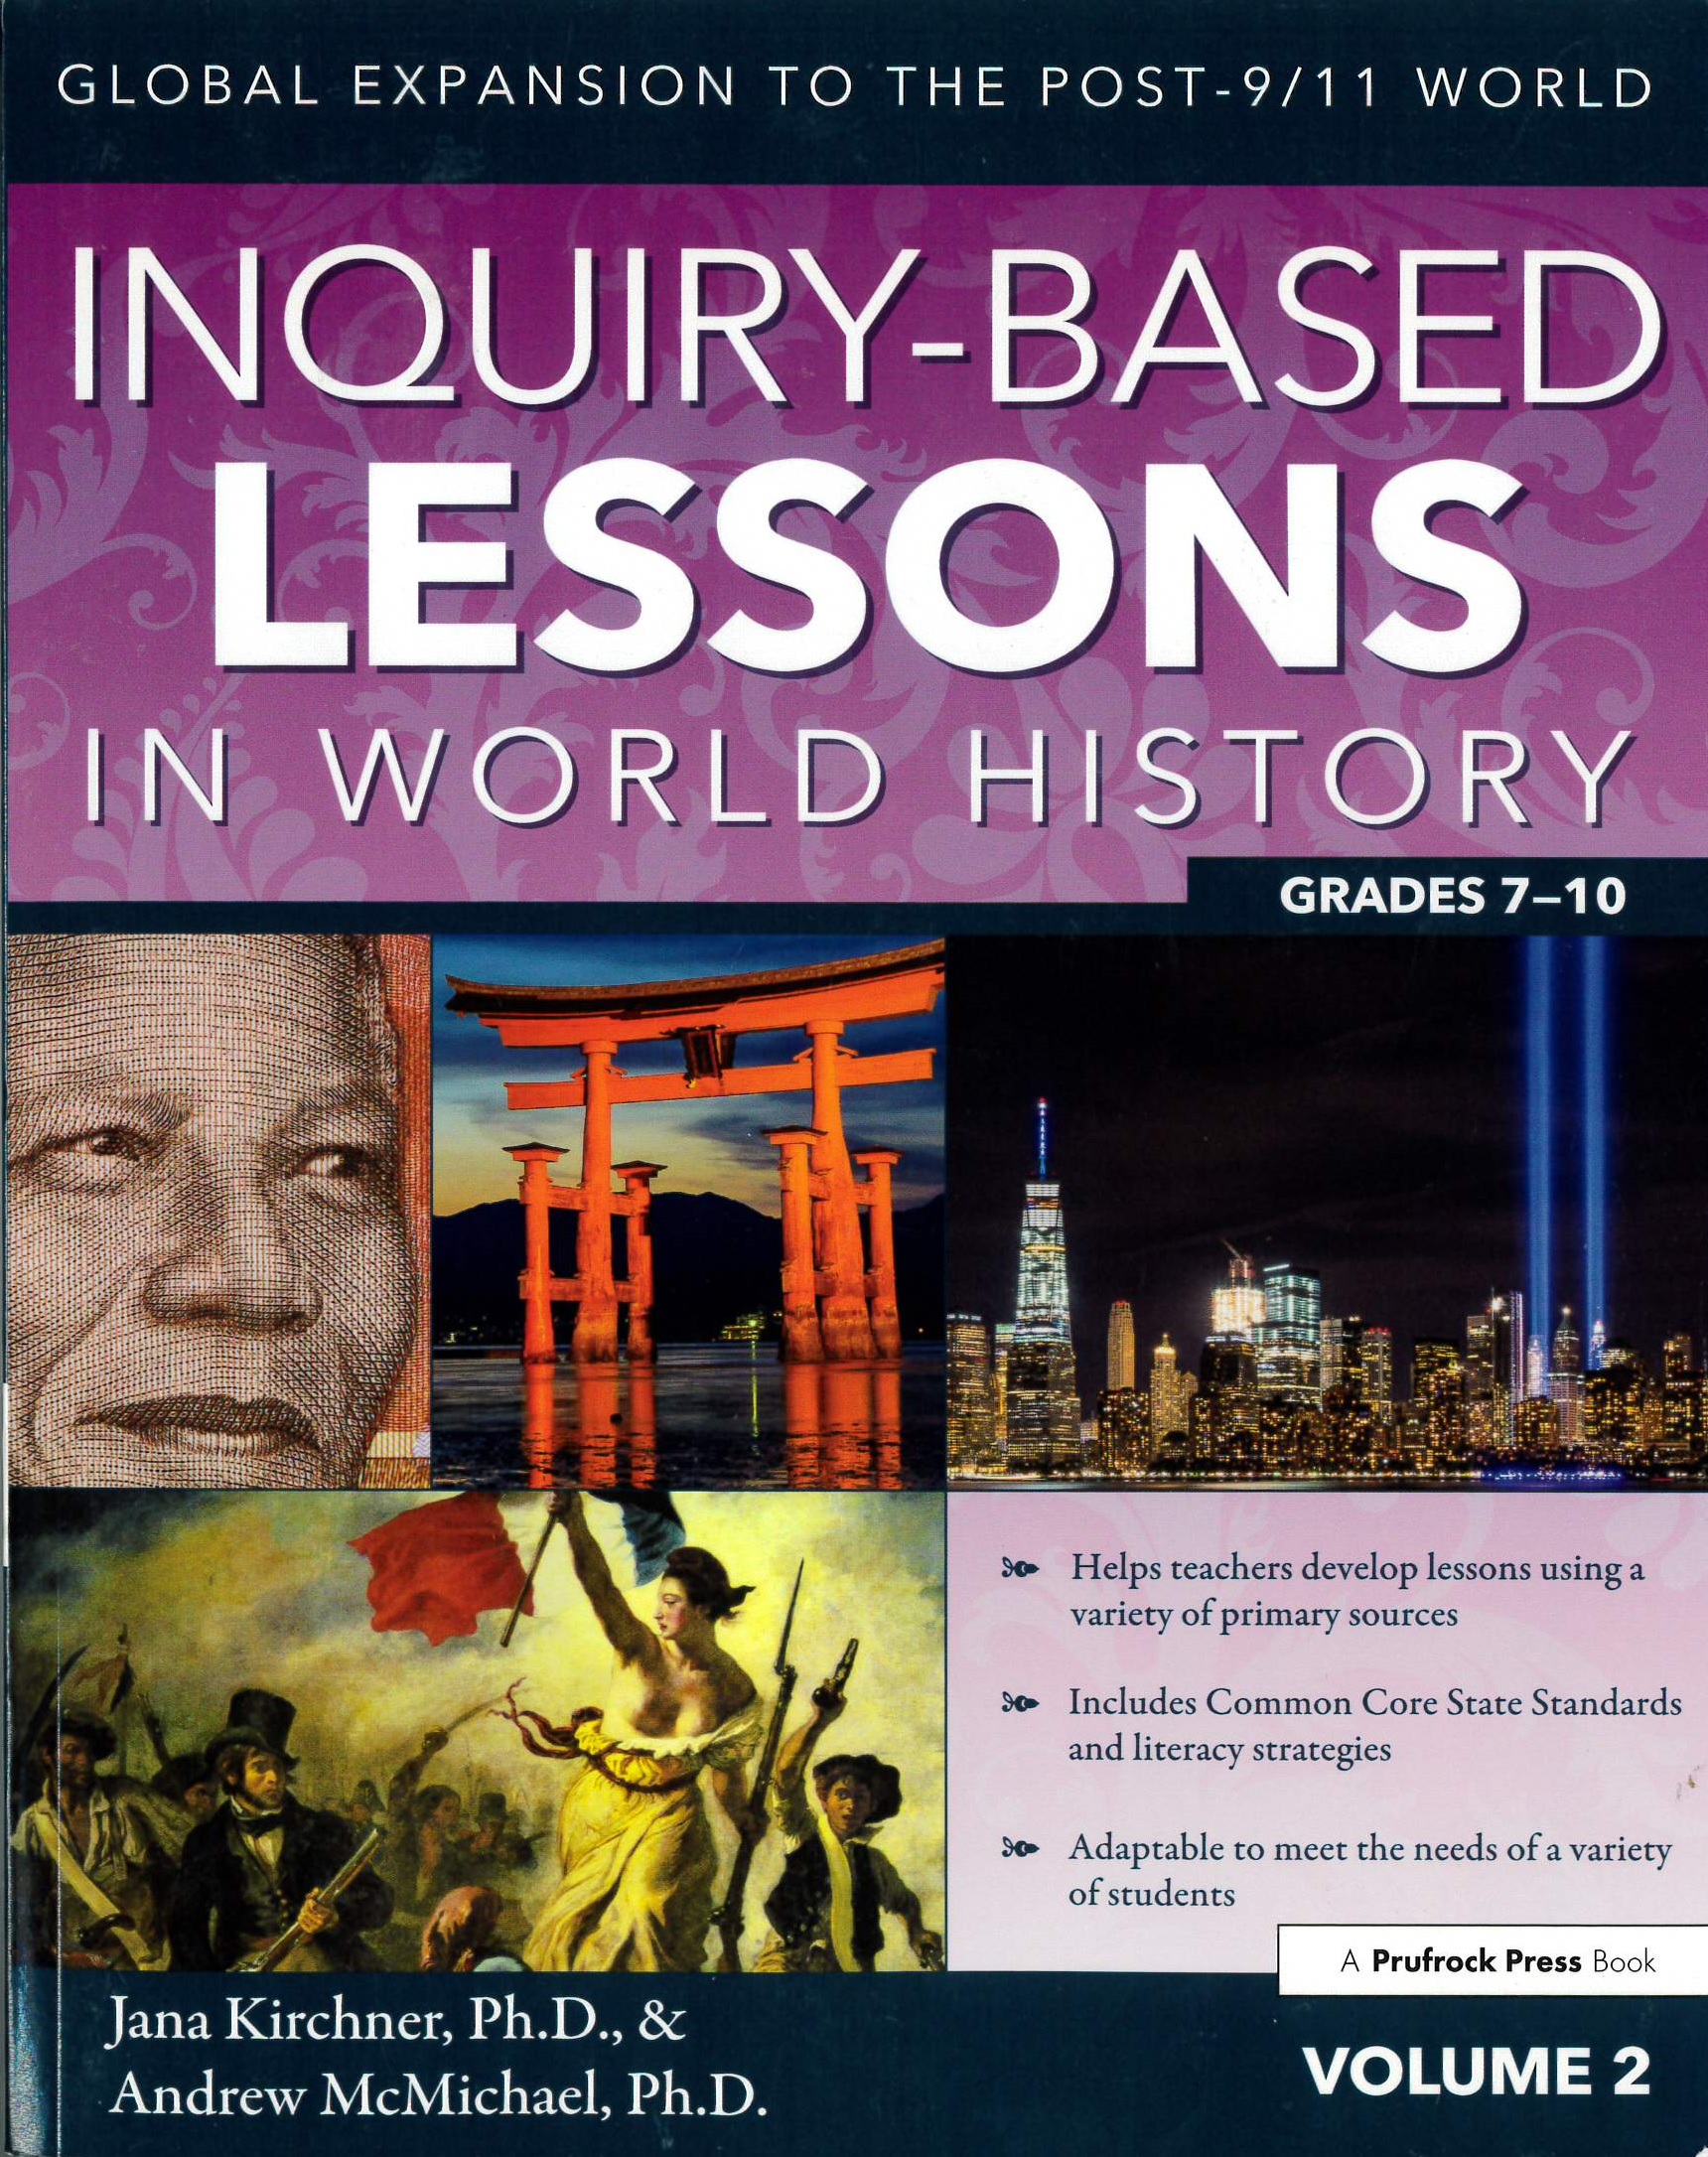 Inquiry-based lessons in world history (Volume 2) : Grades 7-10